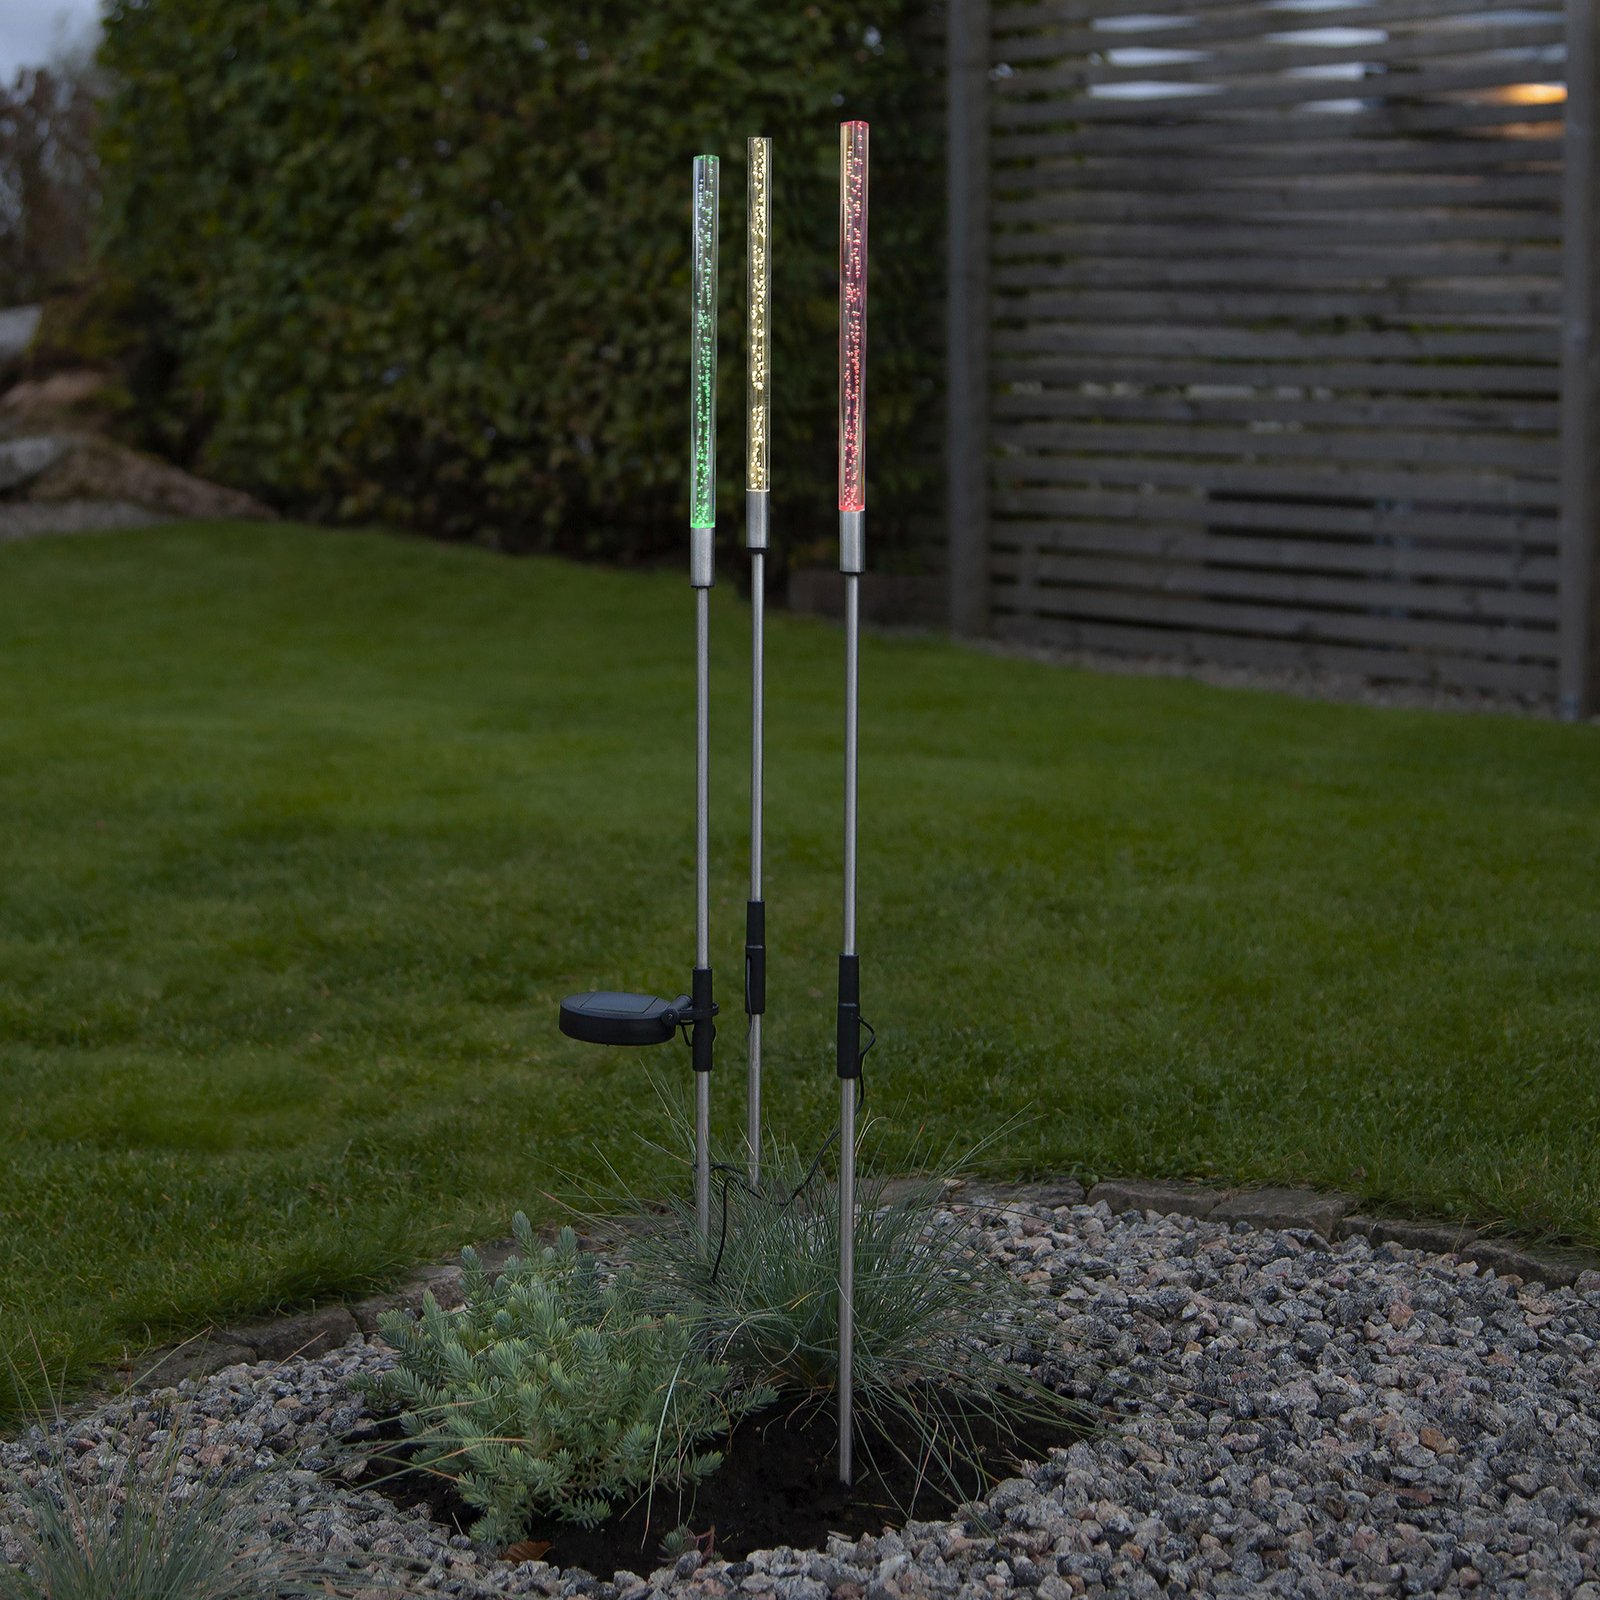 Bubbly LED solar light in a set of 3 multicoloured